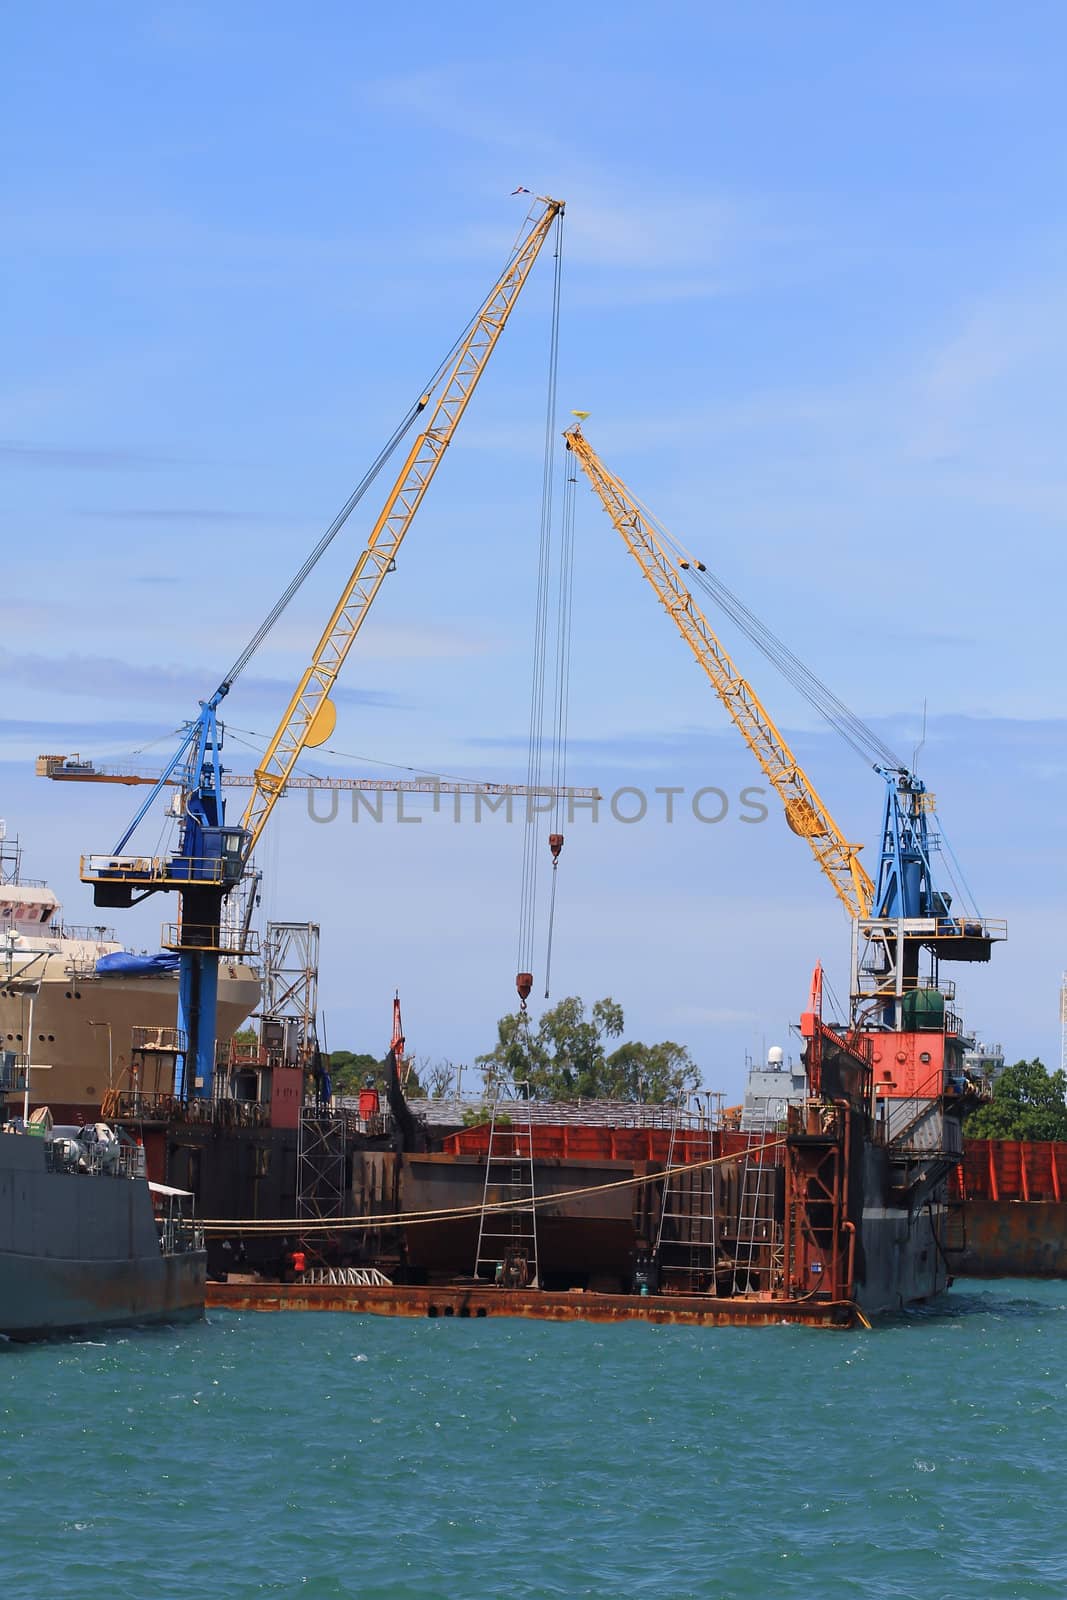 ship for repairs in large floating dry dock by rufous